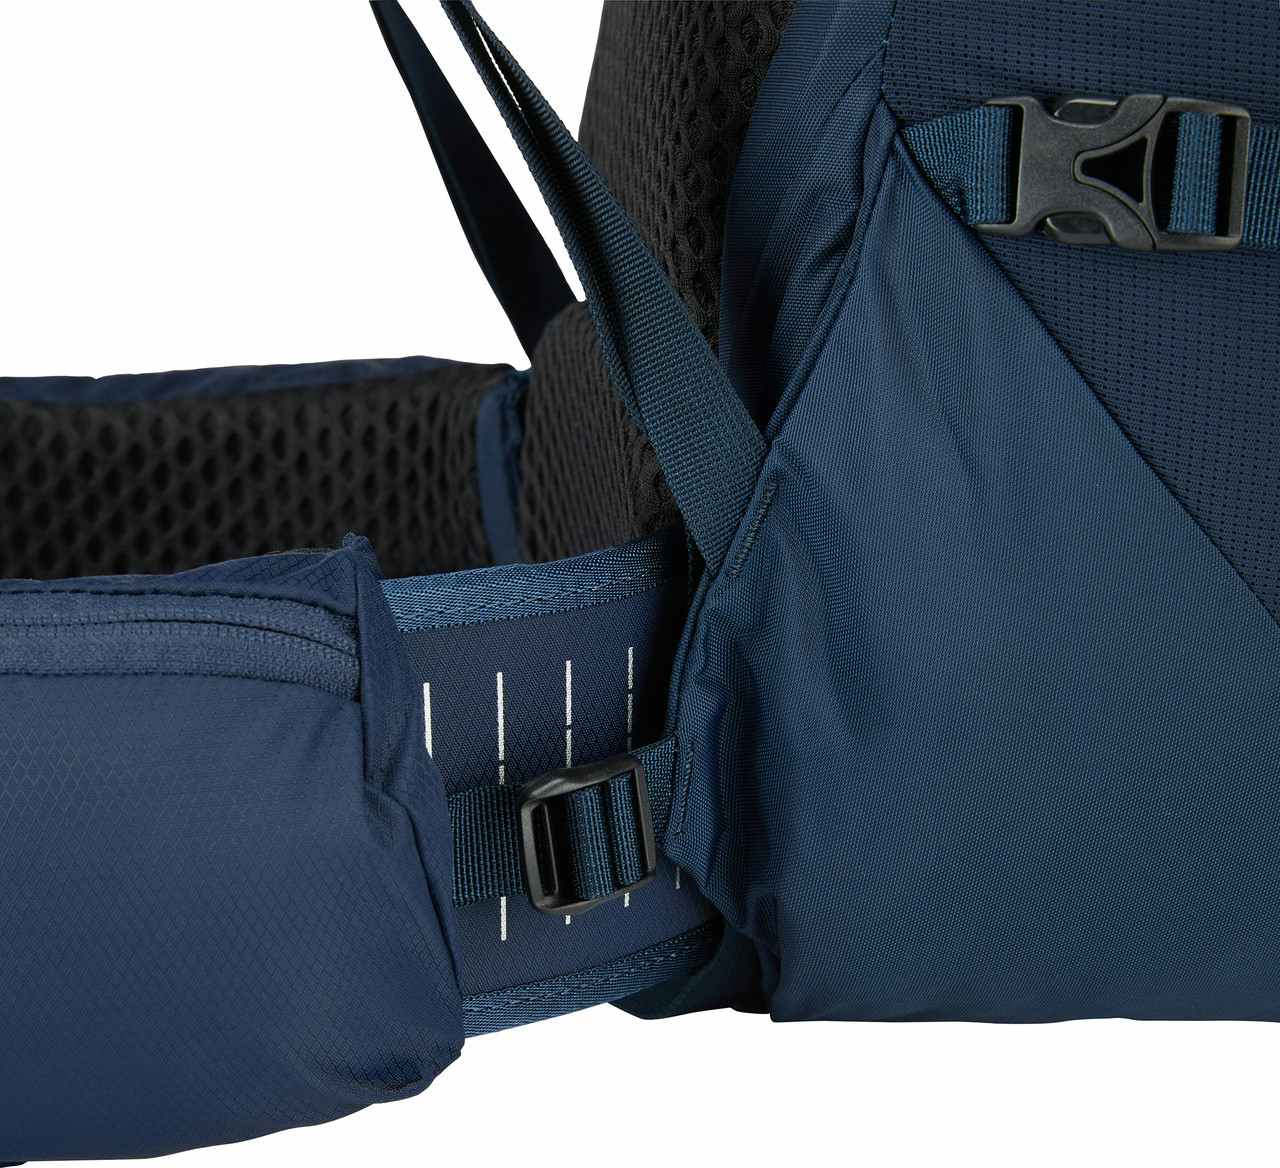 Discovery Pack Deep Navy